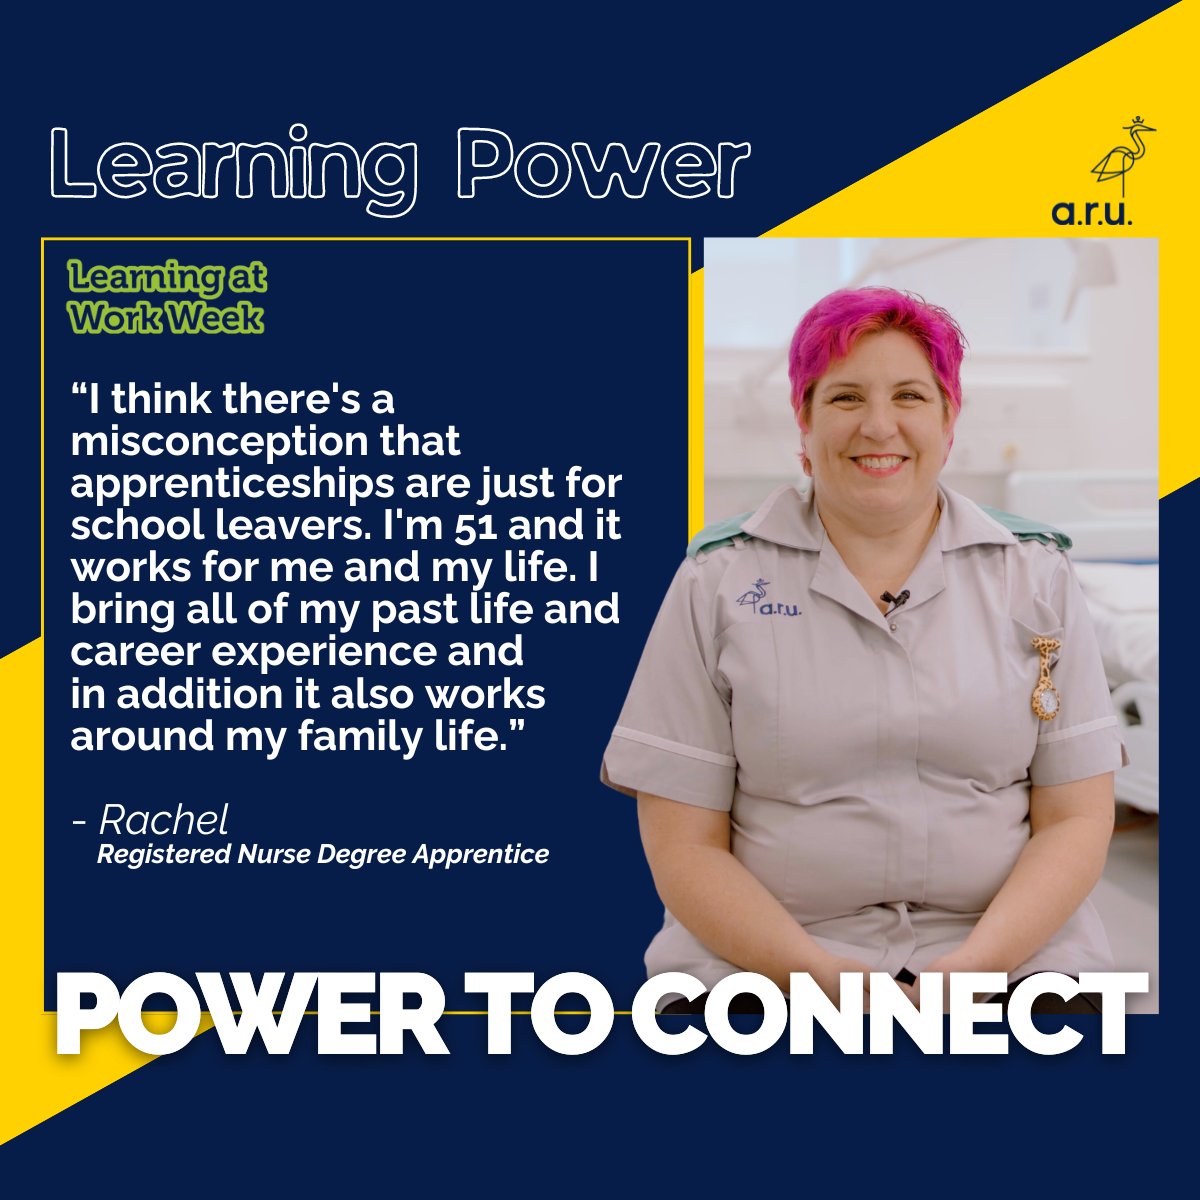 Our growing range of degree apprenticeship courses cover a wide variety of roles and disciplines all whilst you earn with an employer, giving you the power to learn at any age and at any stage of your career. Find your course > aru.ac.uk/study/degree-a… #learningatworkweek